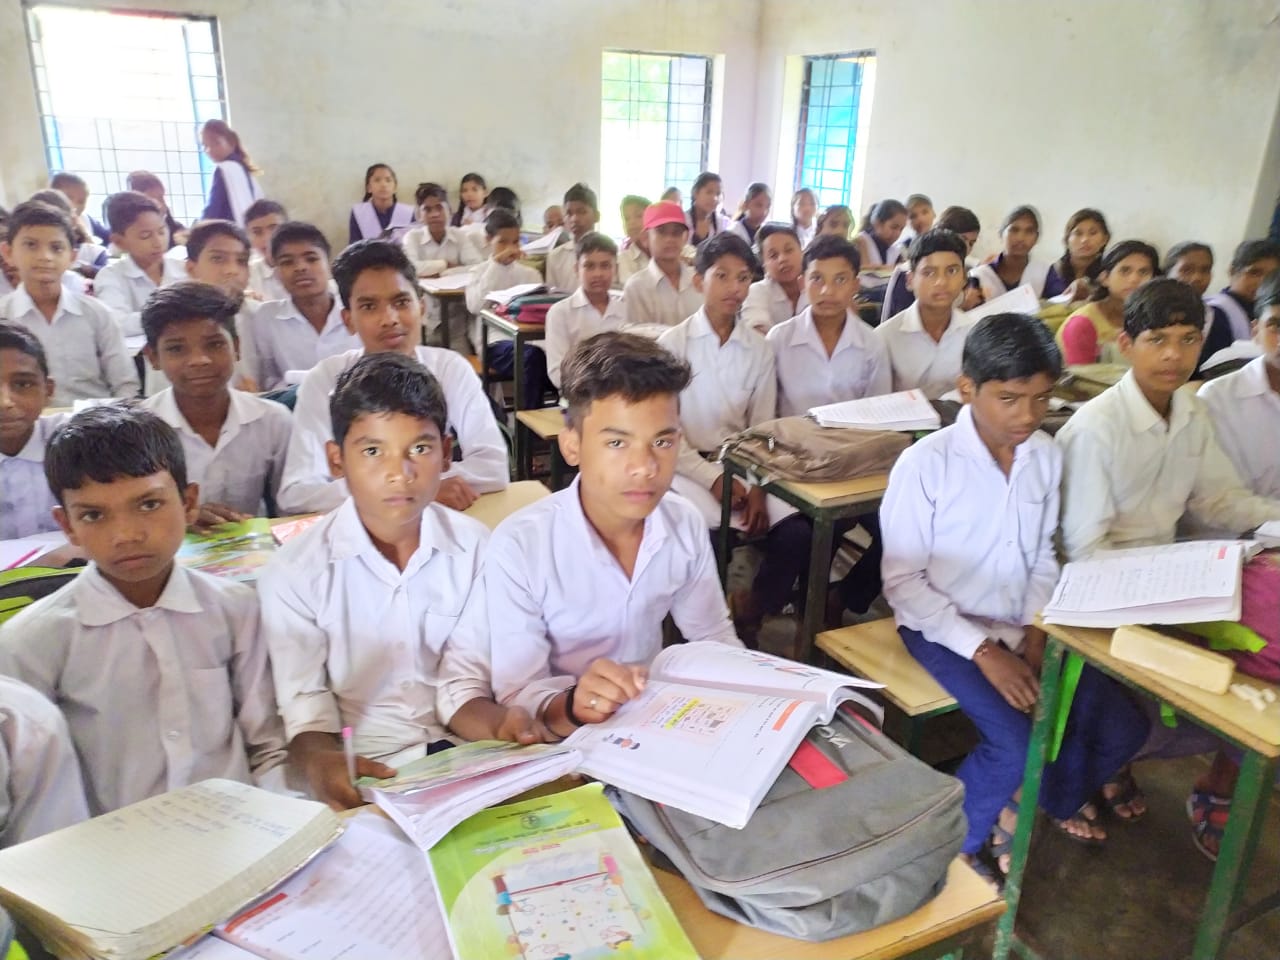 Only 137 high and higher secondary schools for 574 villages in the dis